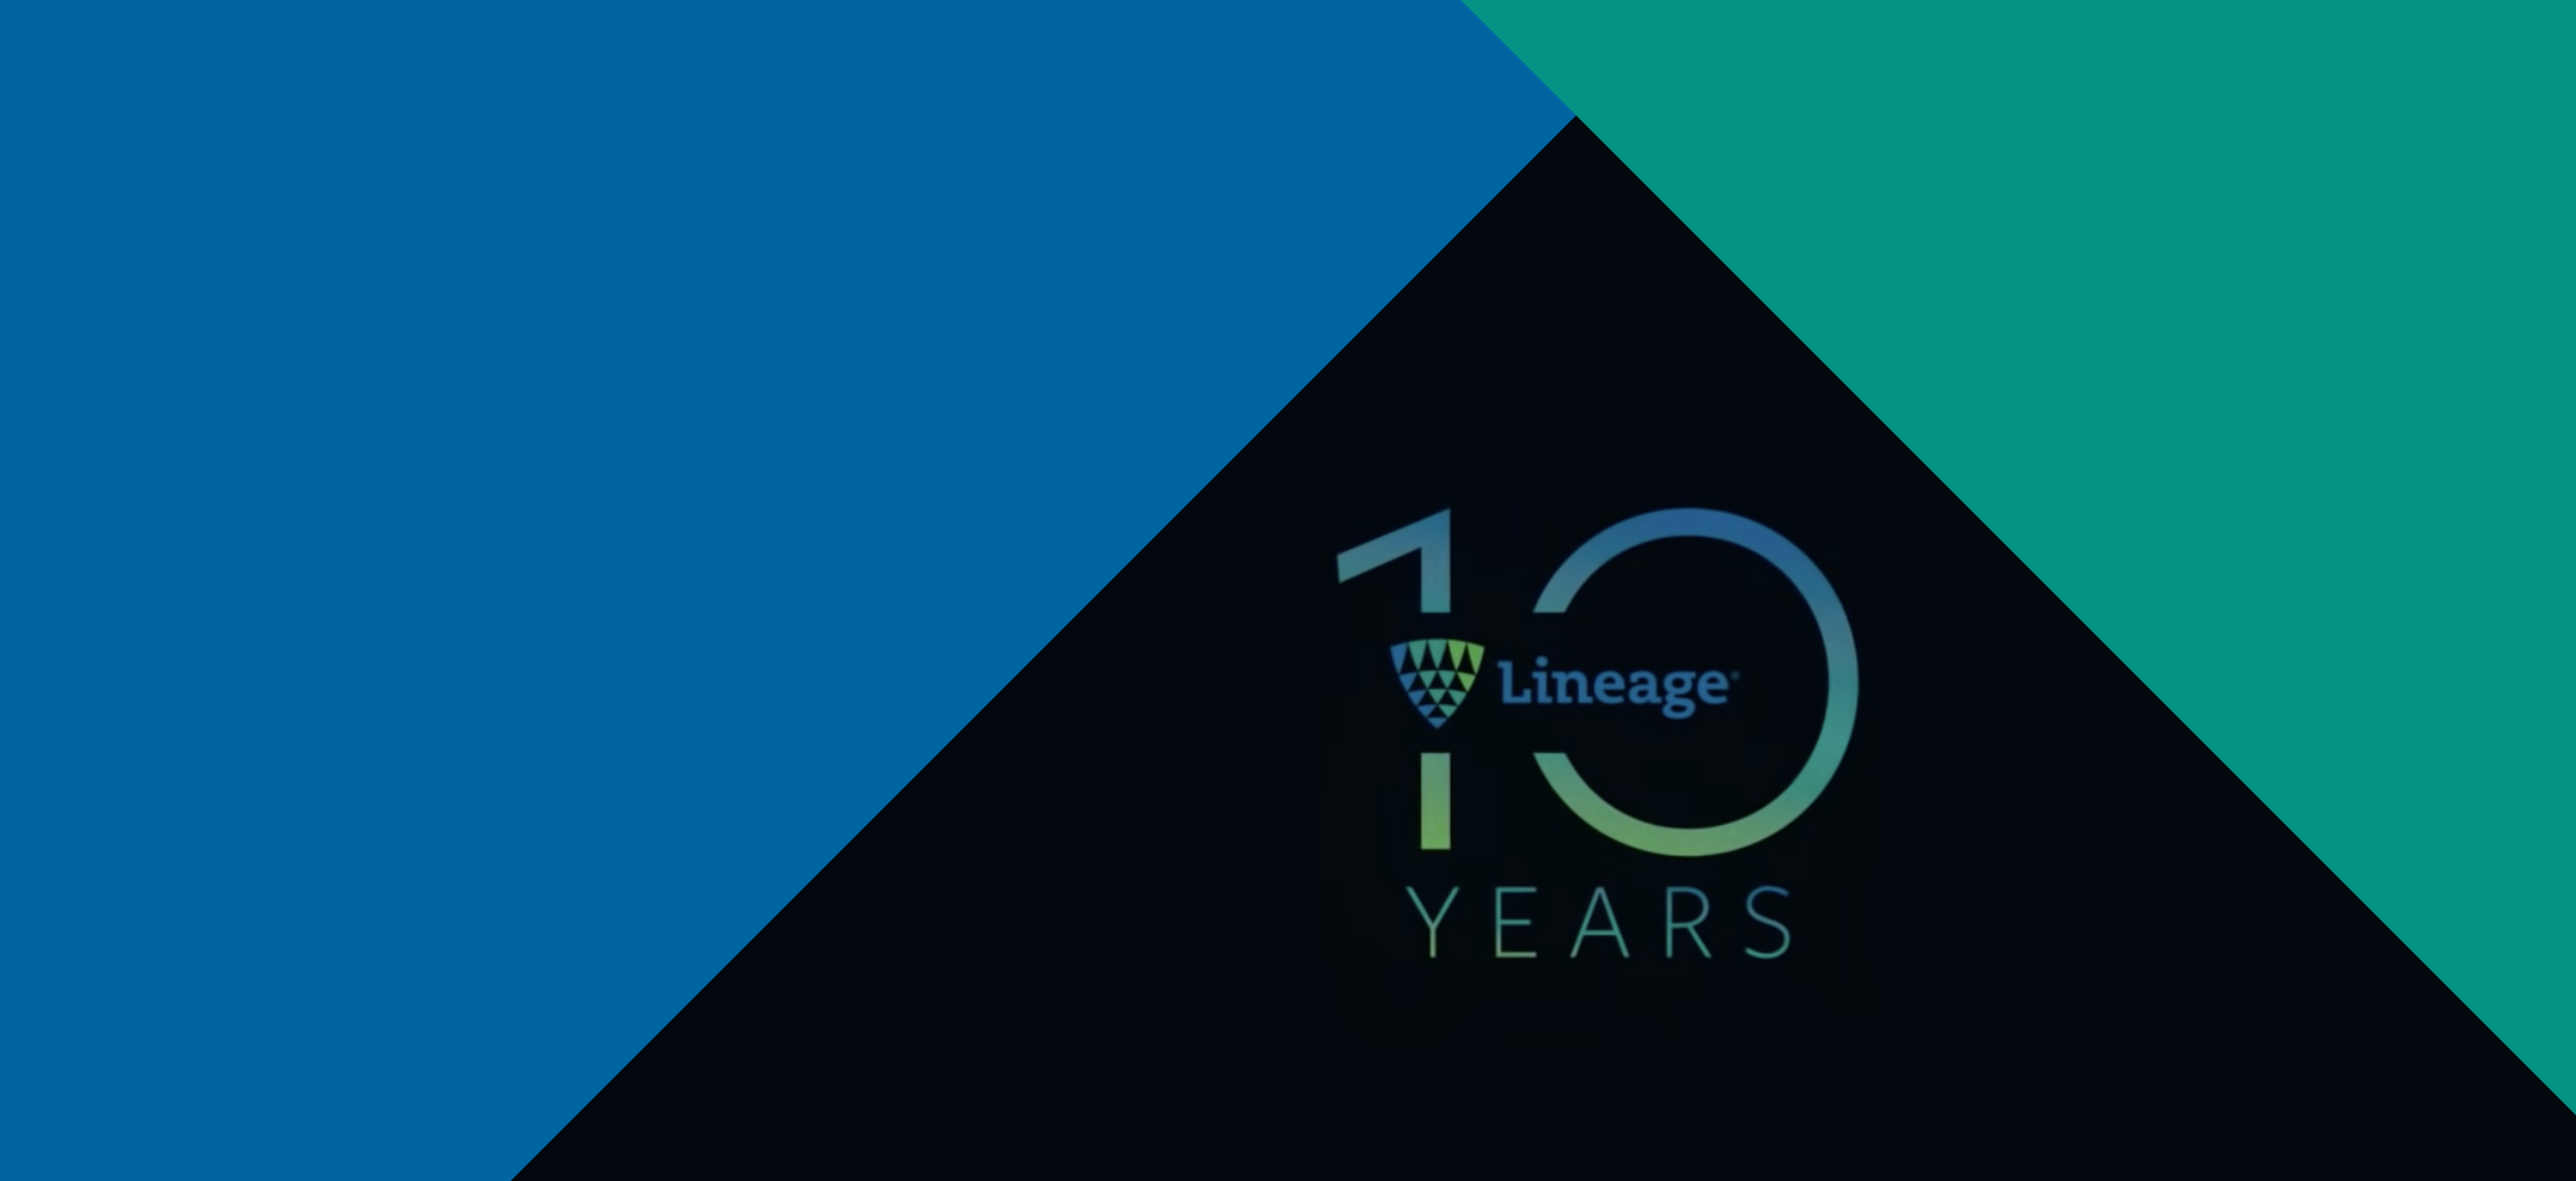 Decorative graphic that says: Lineage 10 years